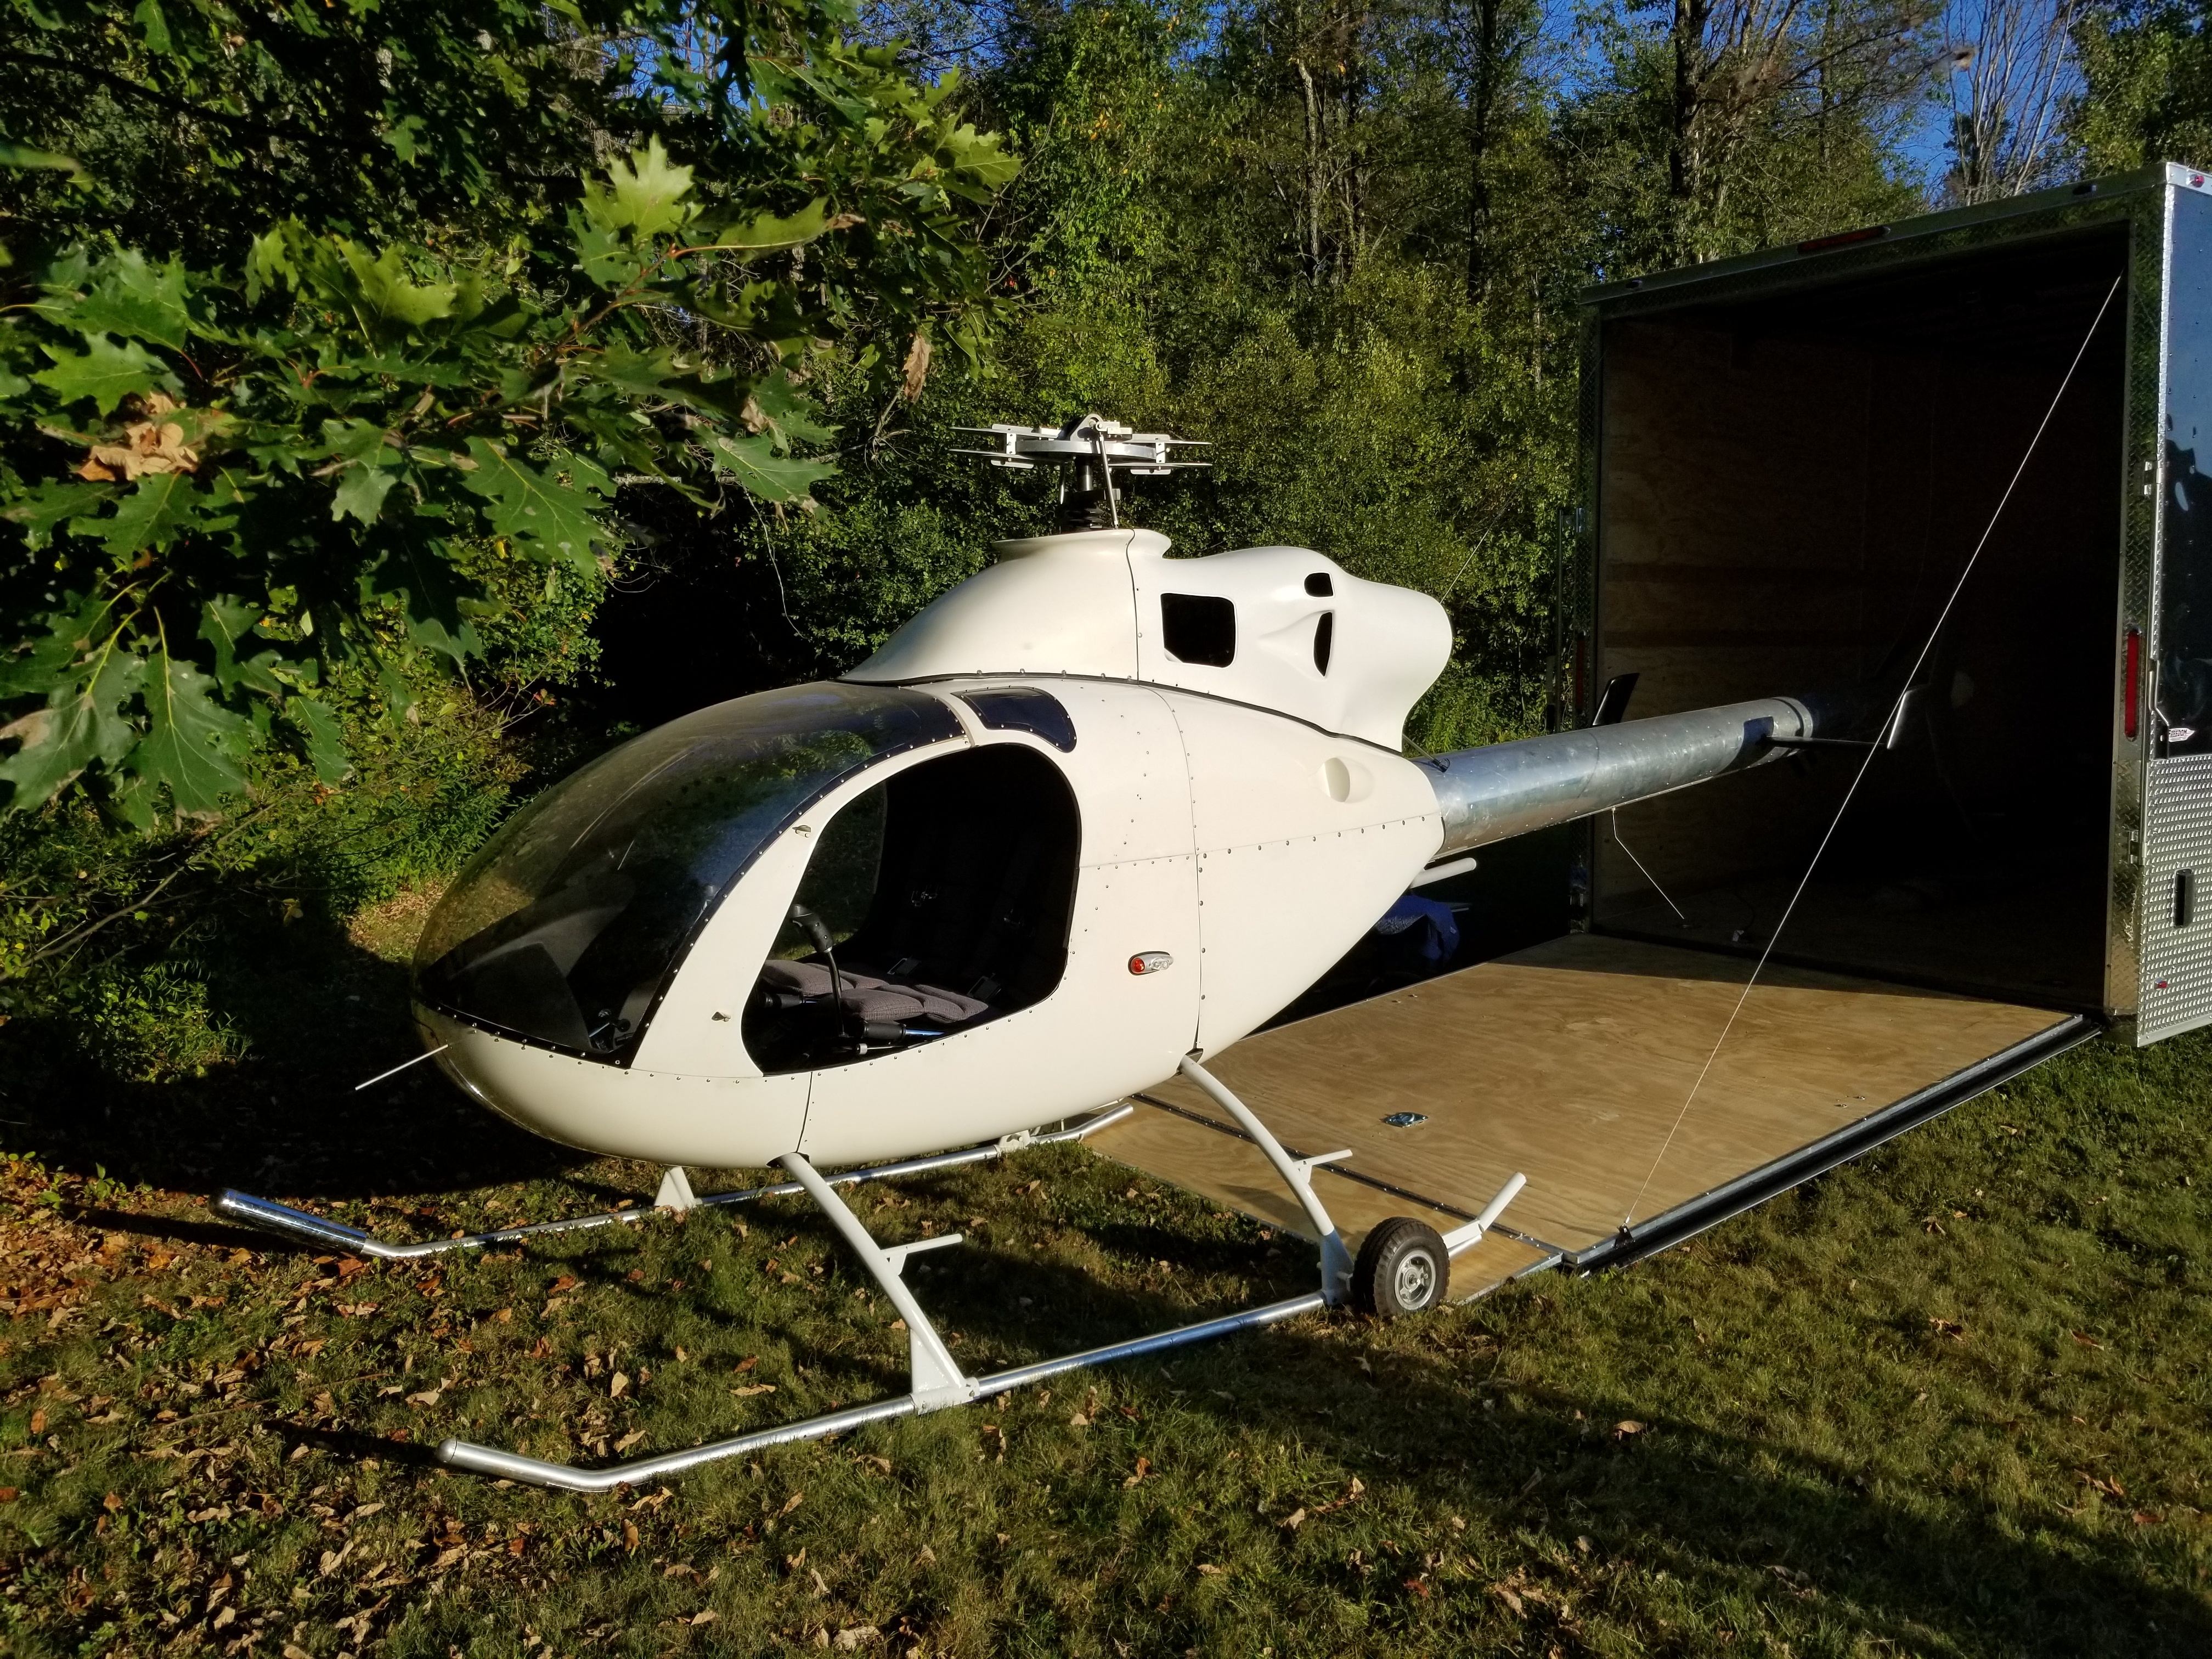 Getting Carried Away (Literally) with a Hobby - How I Ended up with a Helicopter